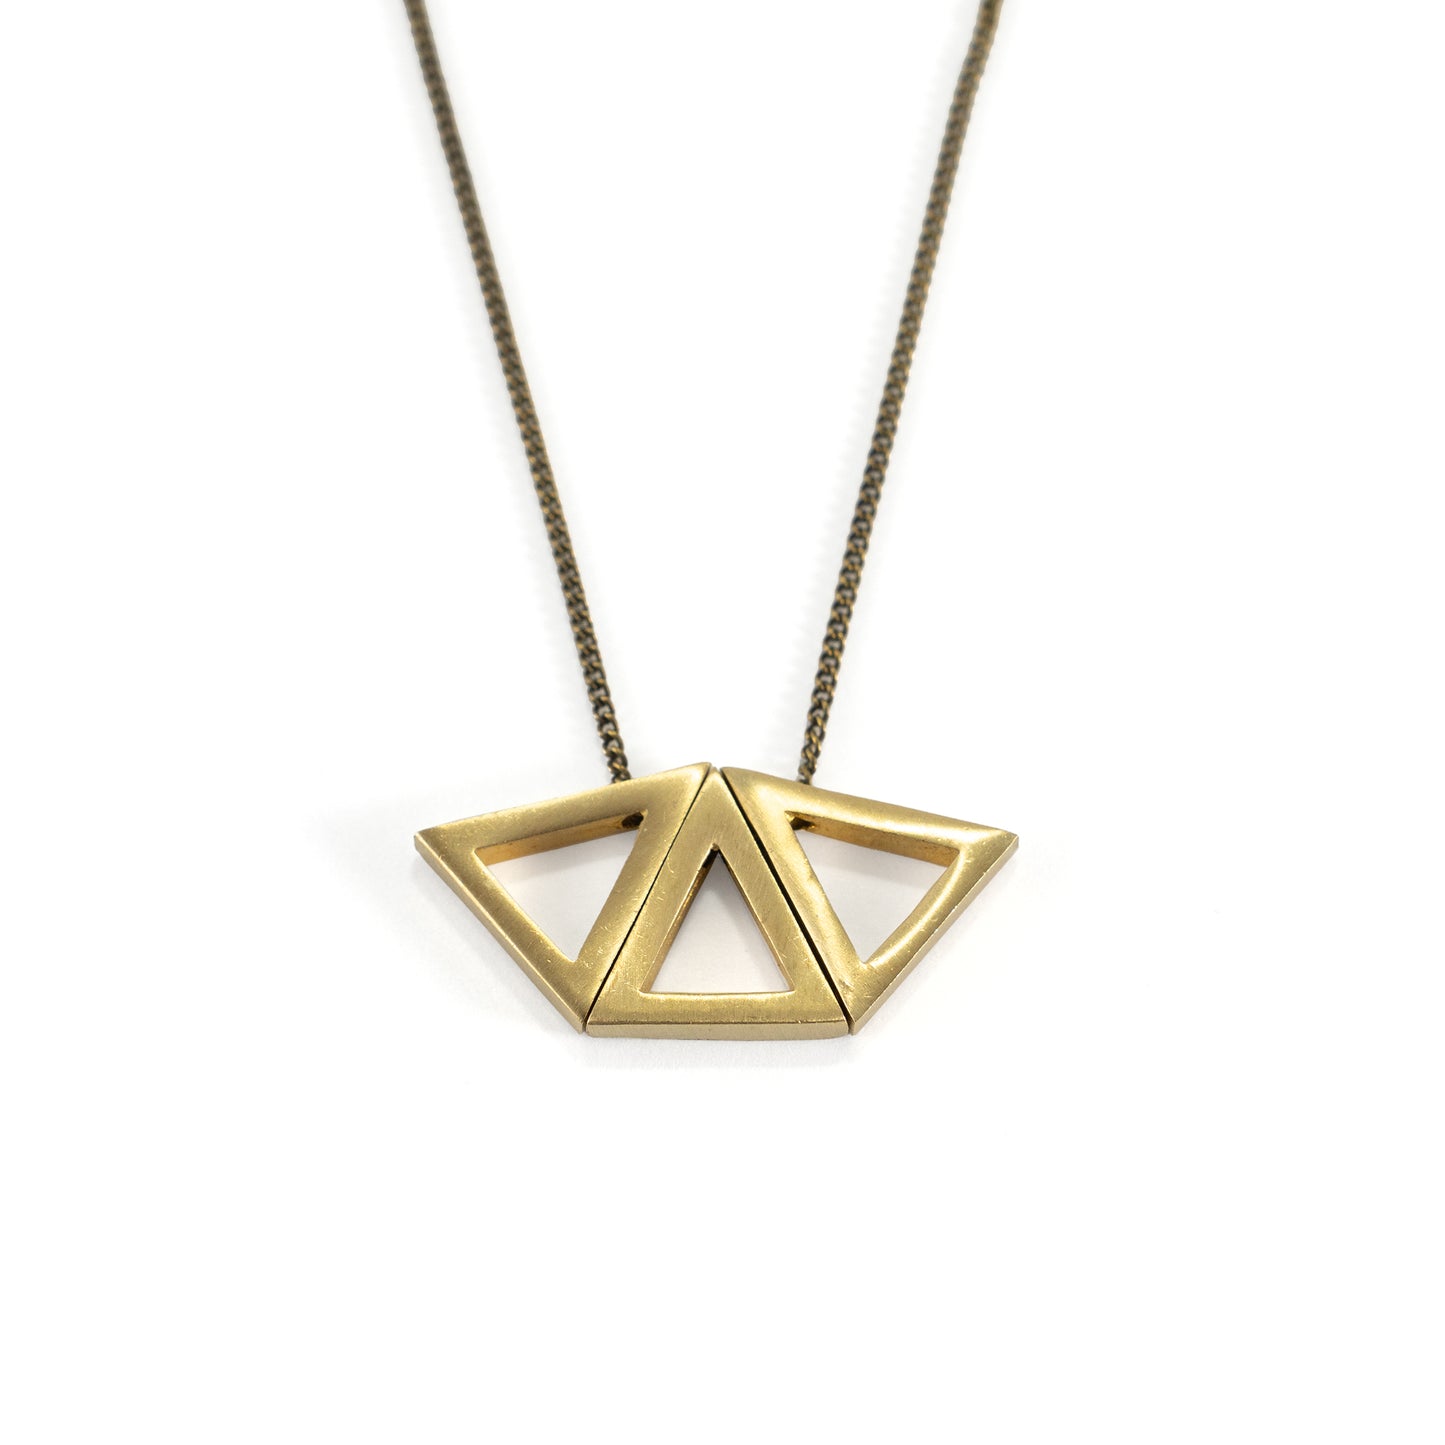 Three Triangles Necklace